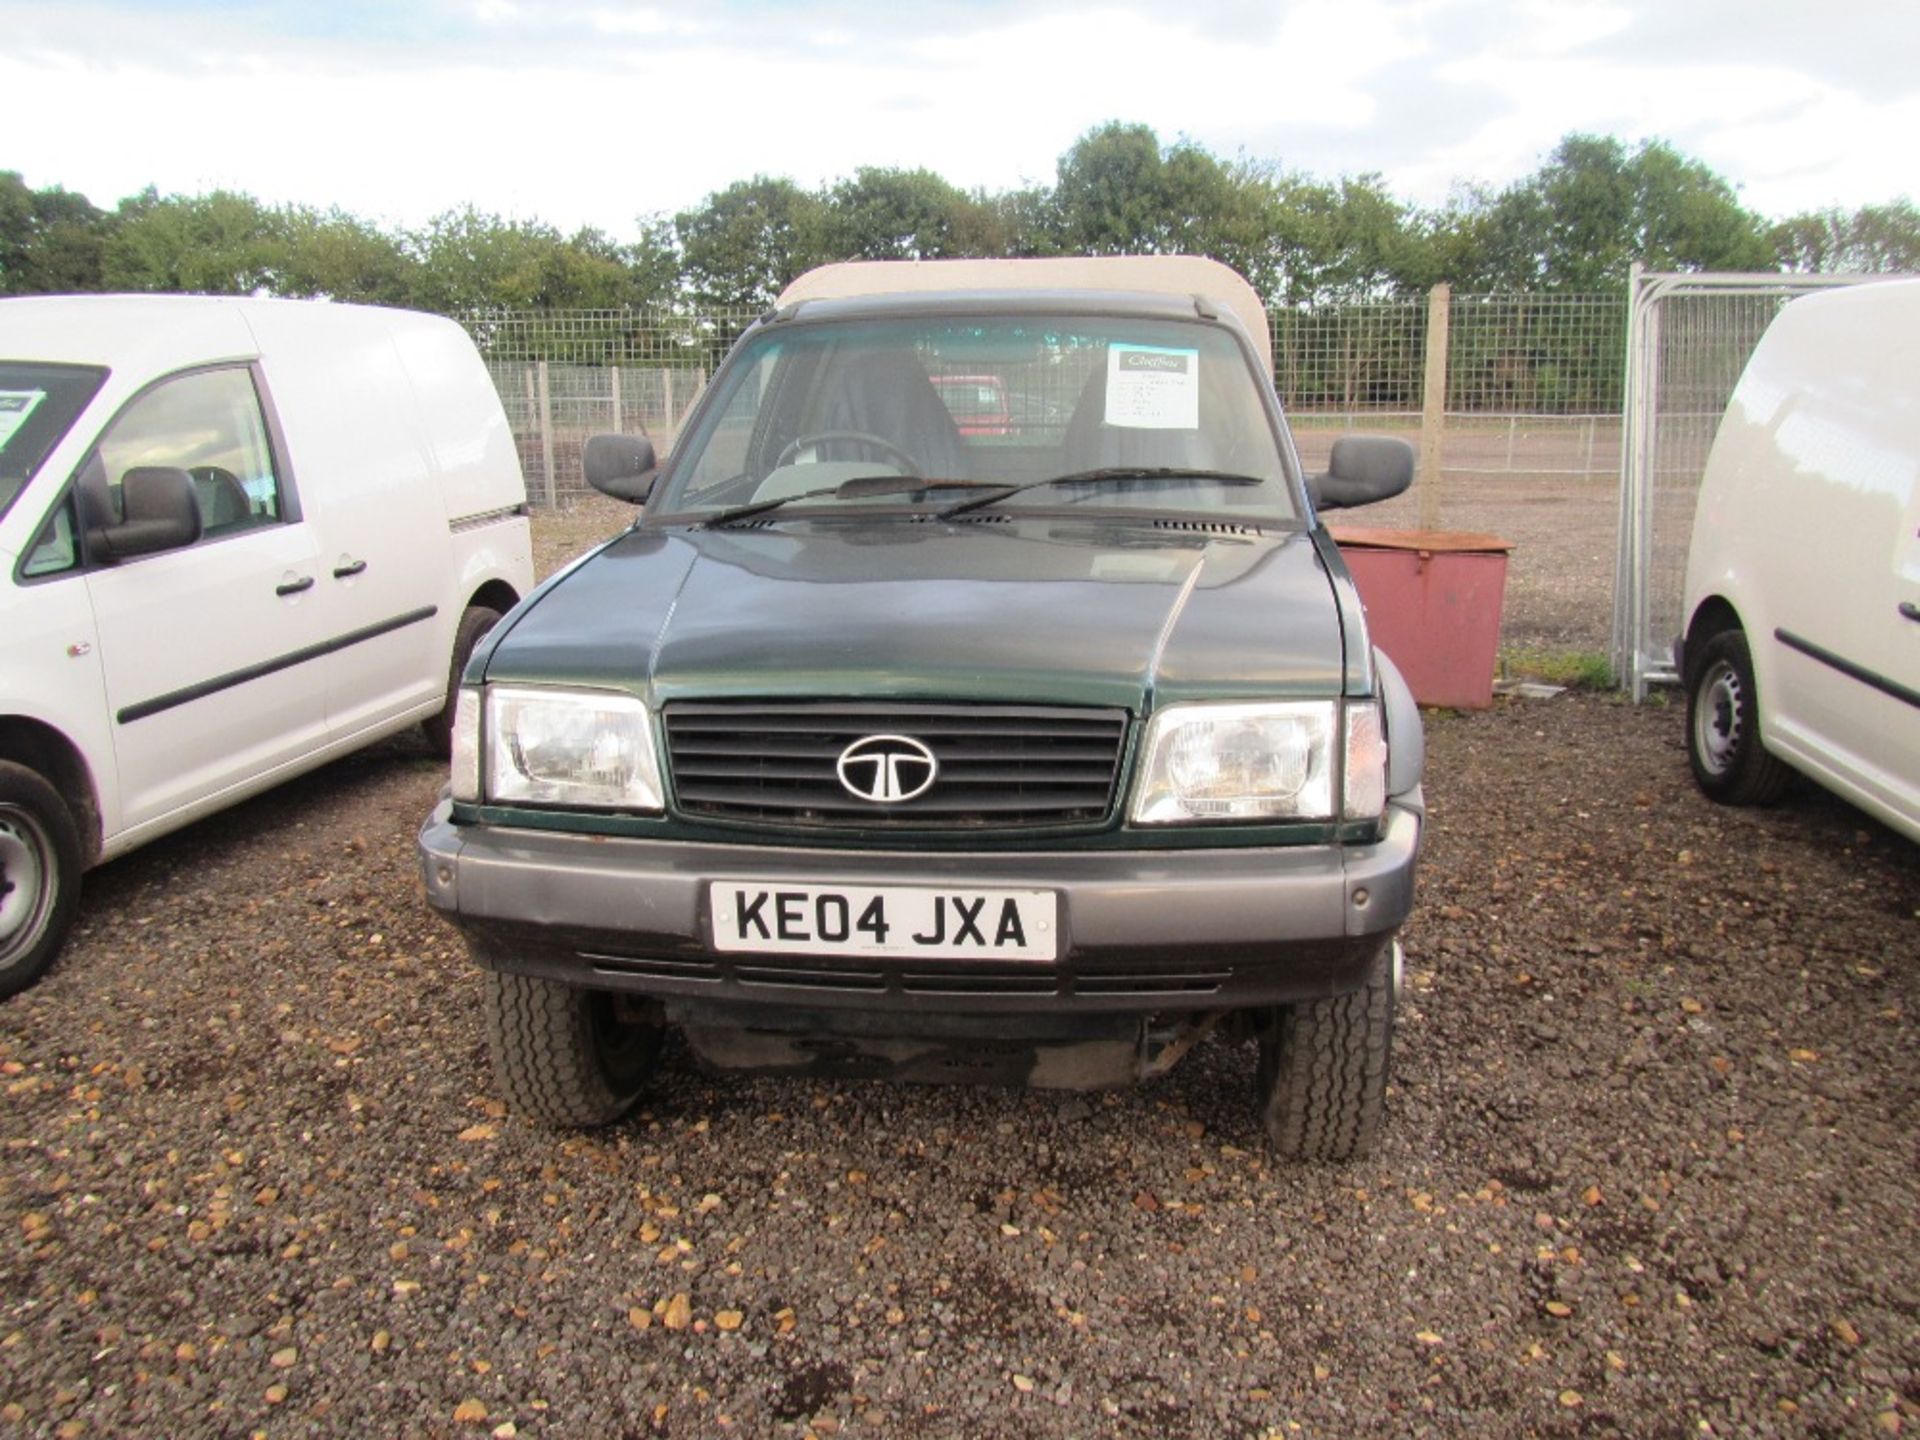 Tata TL2 SWB Pick Up. Registration Documents will be supplied. Mileage: 62,133. No MOT. Reg. No. - Image 2 of 7